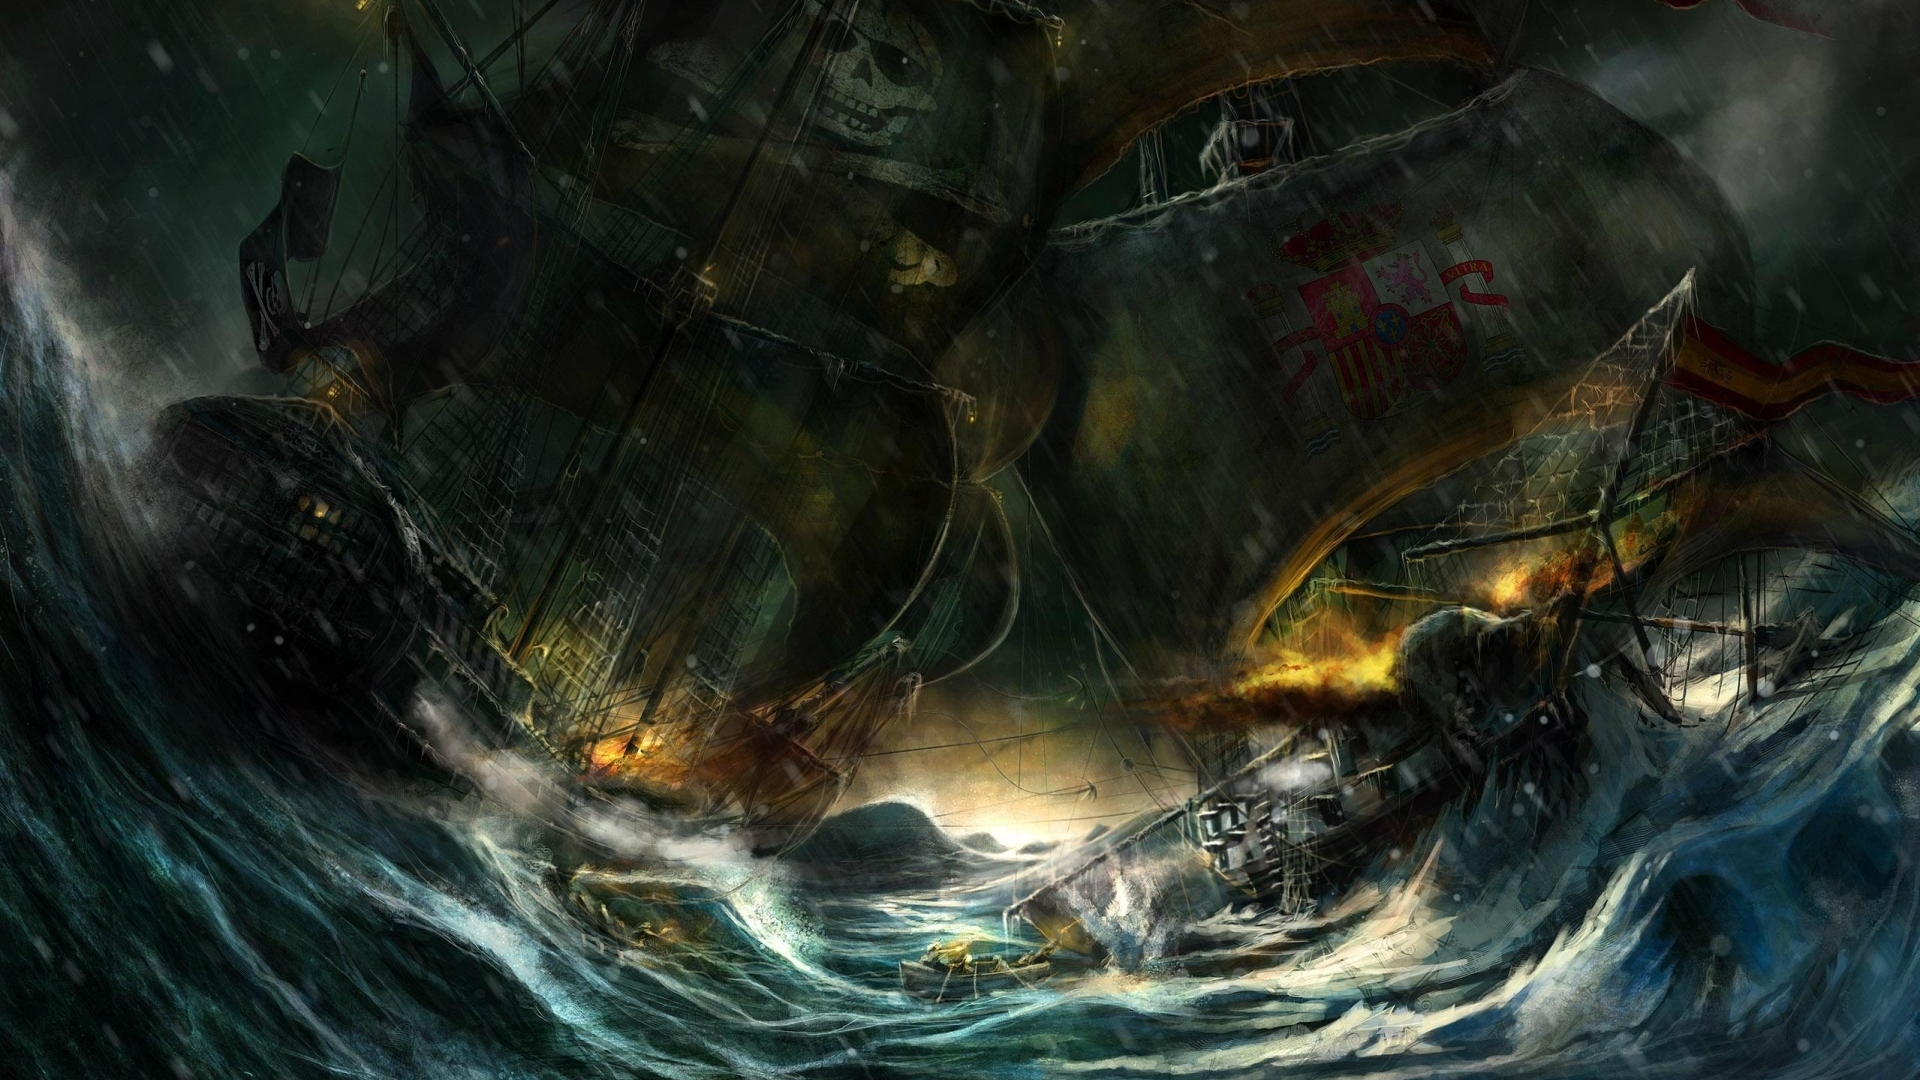 Download Battle of pirate ship wallpaper in 3D   Abstract wallpapers 1920x1080